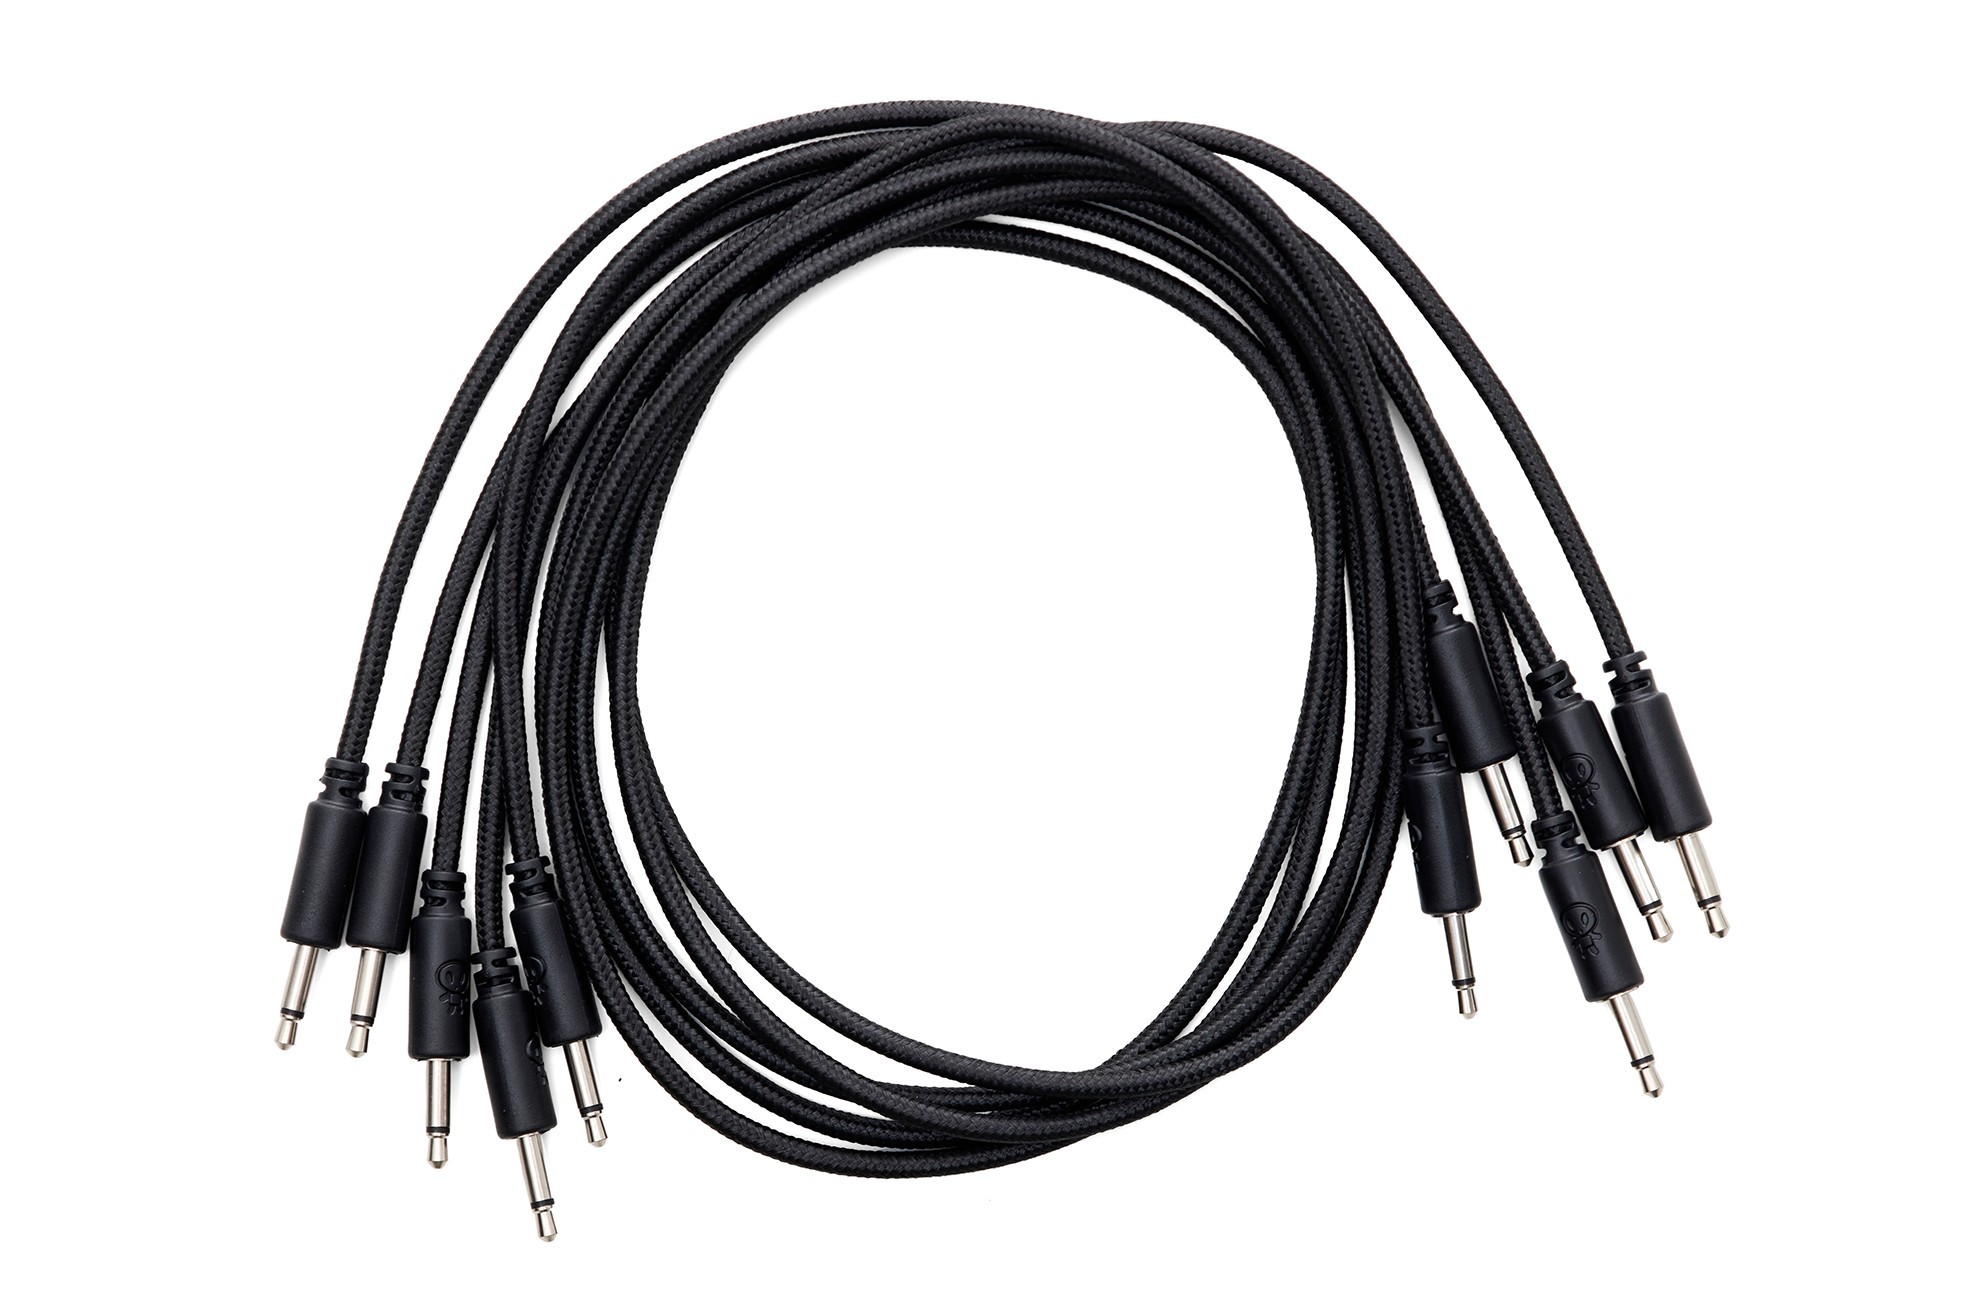 Erica Synths Braided Eurorack Patch Cables 60cm (5 pcs) - Black